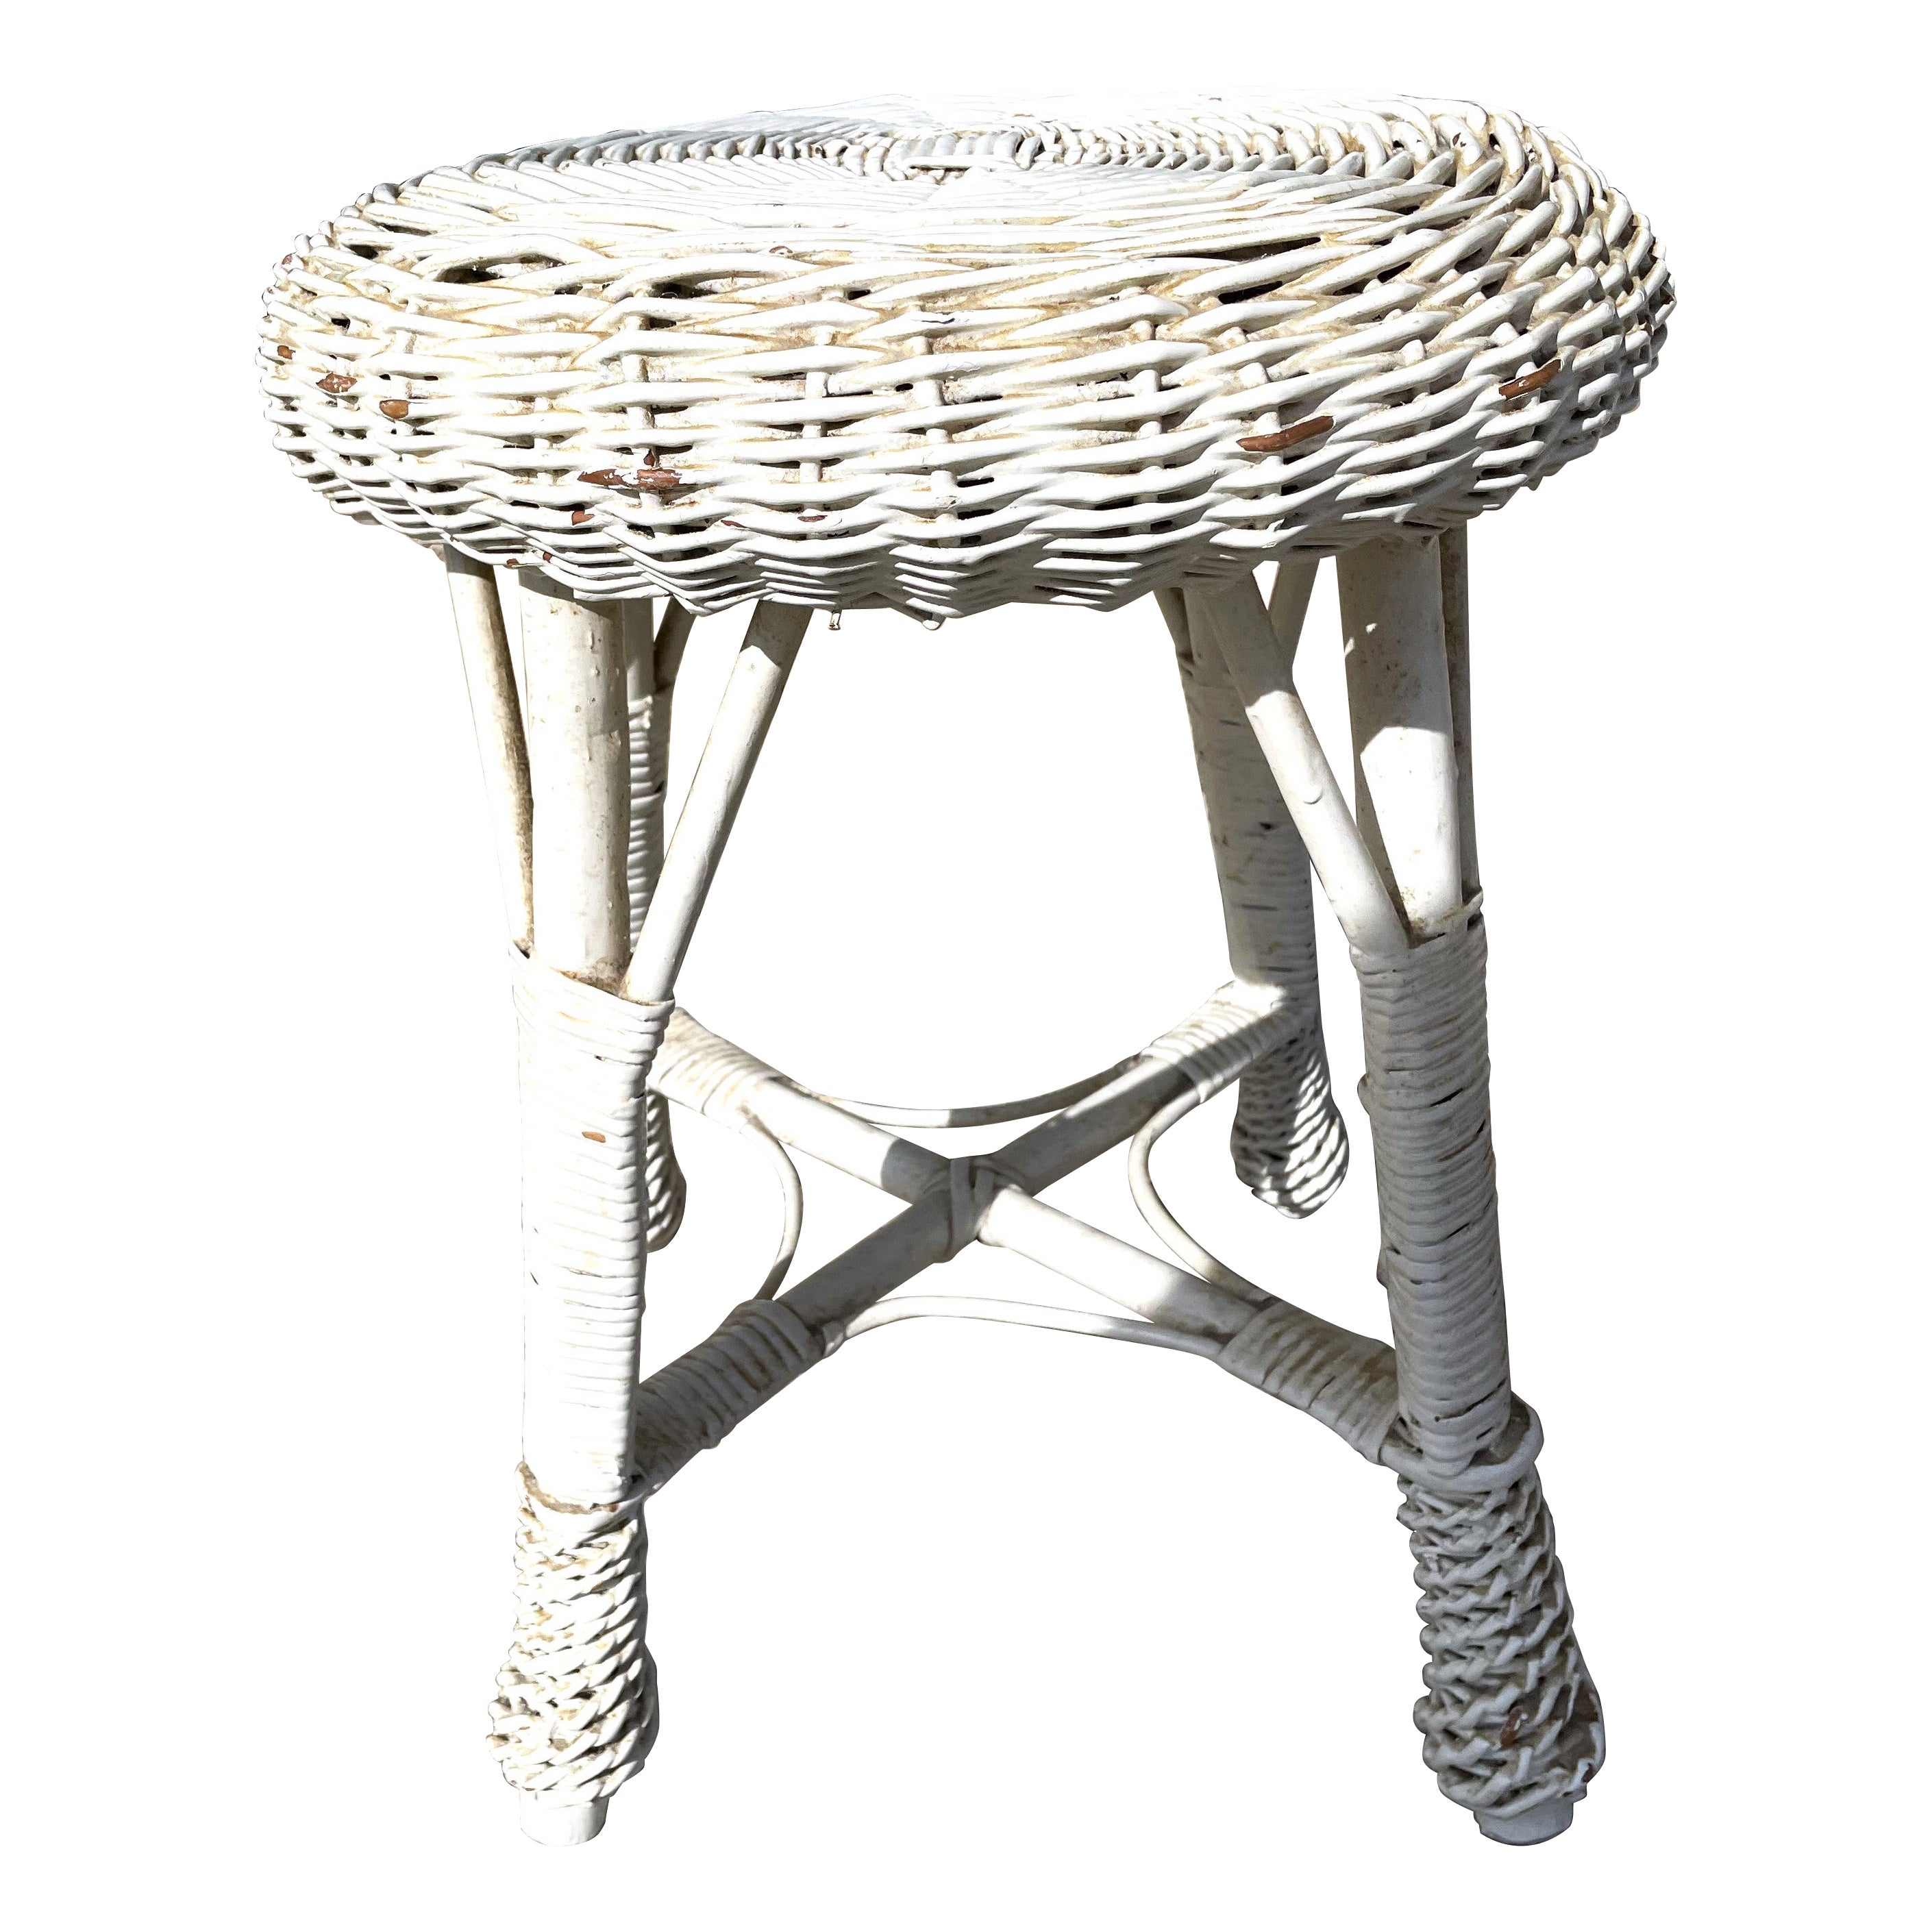 White Wicker/Rattan Drink/Plant Stand/Table or Vanity/Bohemian Stool